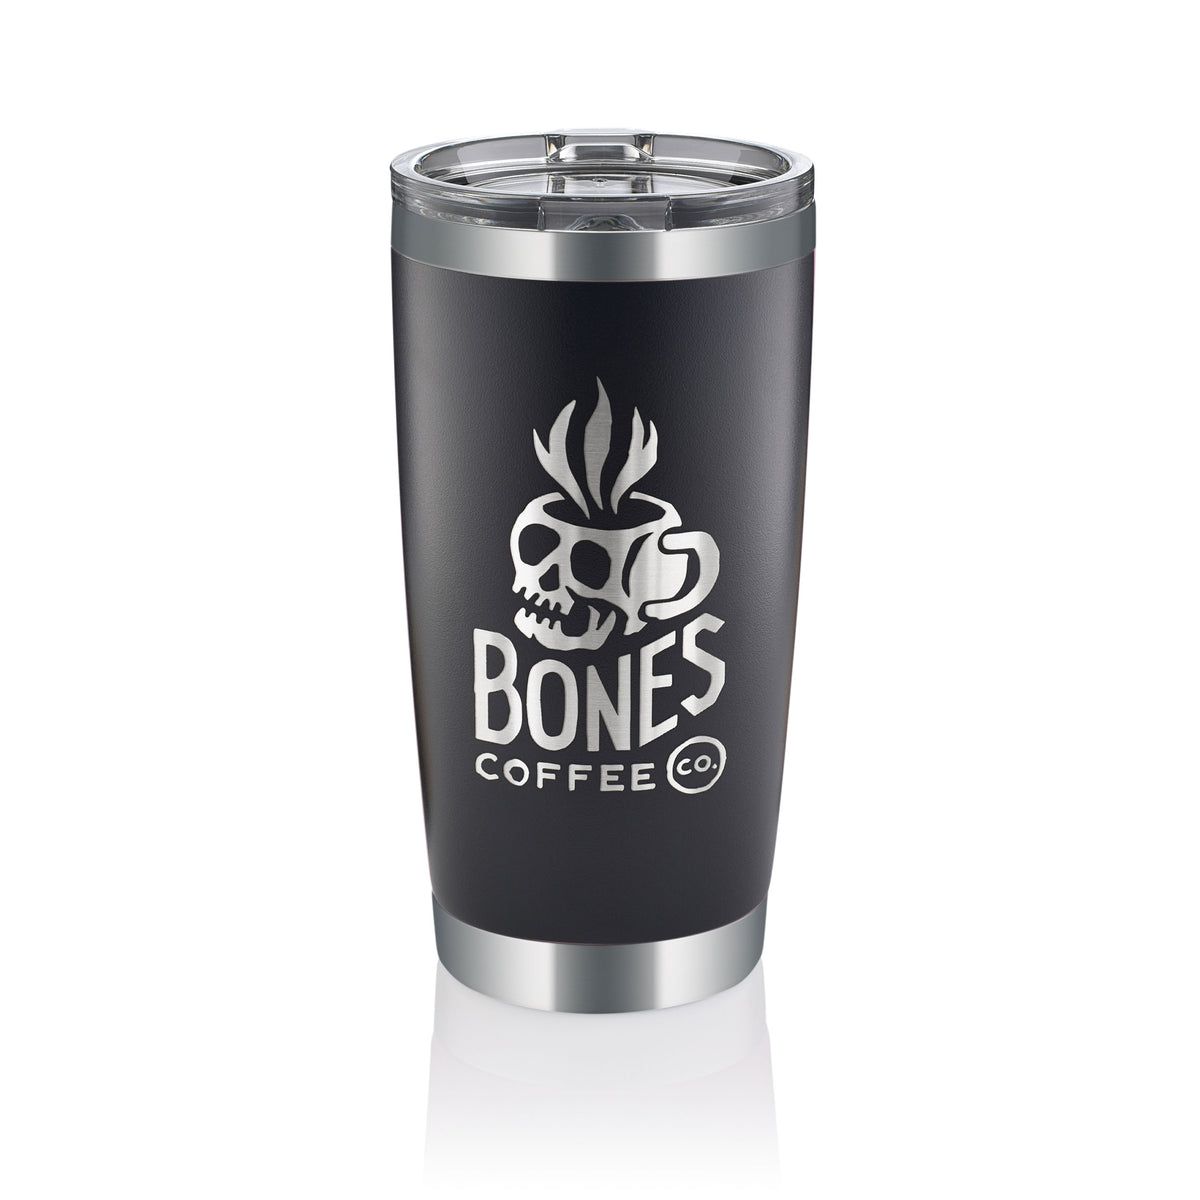 Kosmo's Q 20 oz Tumbler - Stays Hot Or Cold For Hours